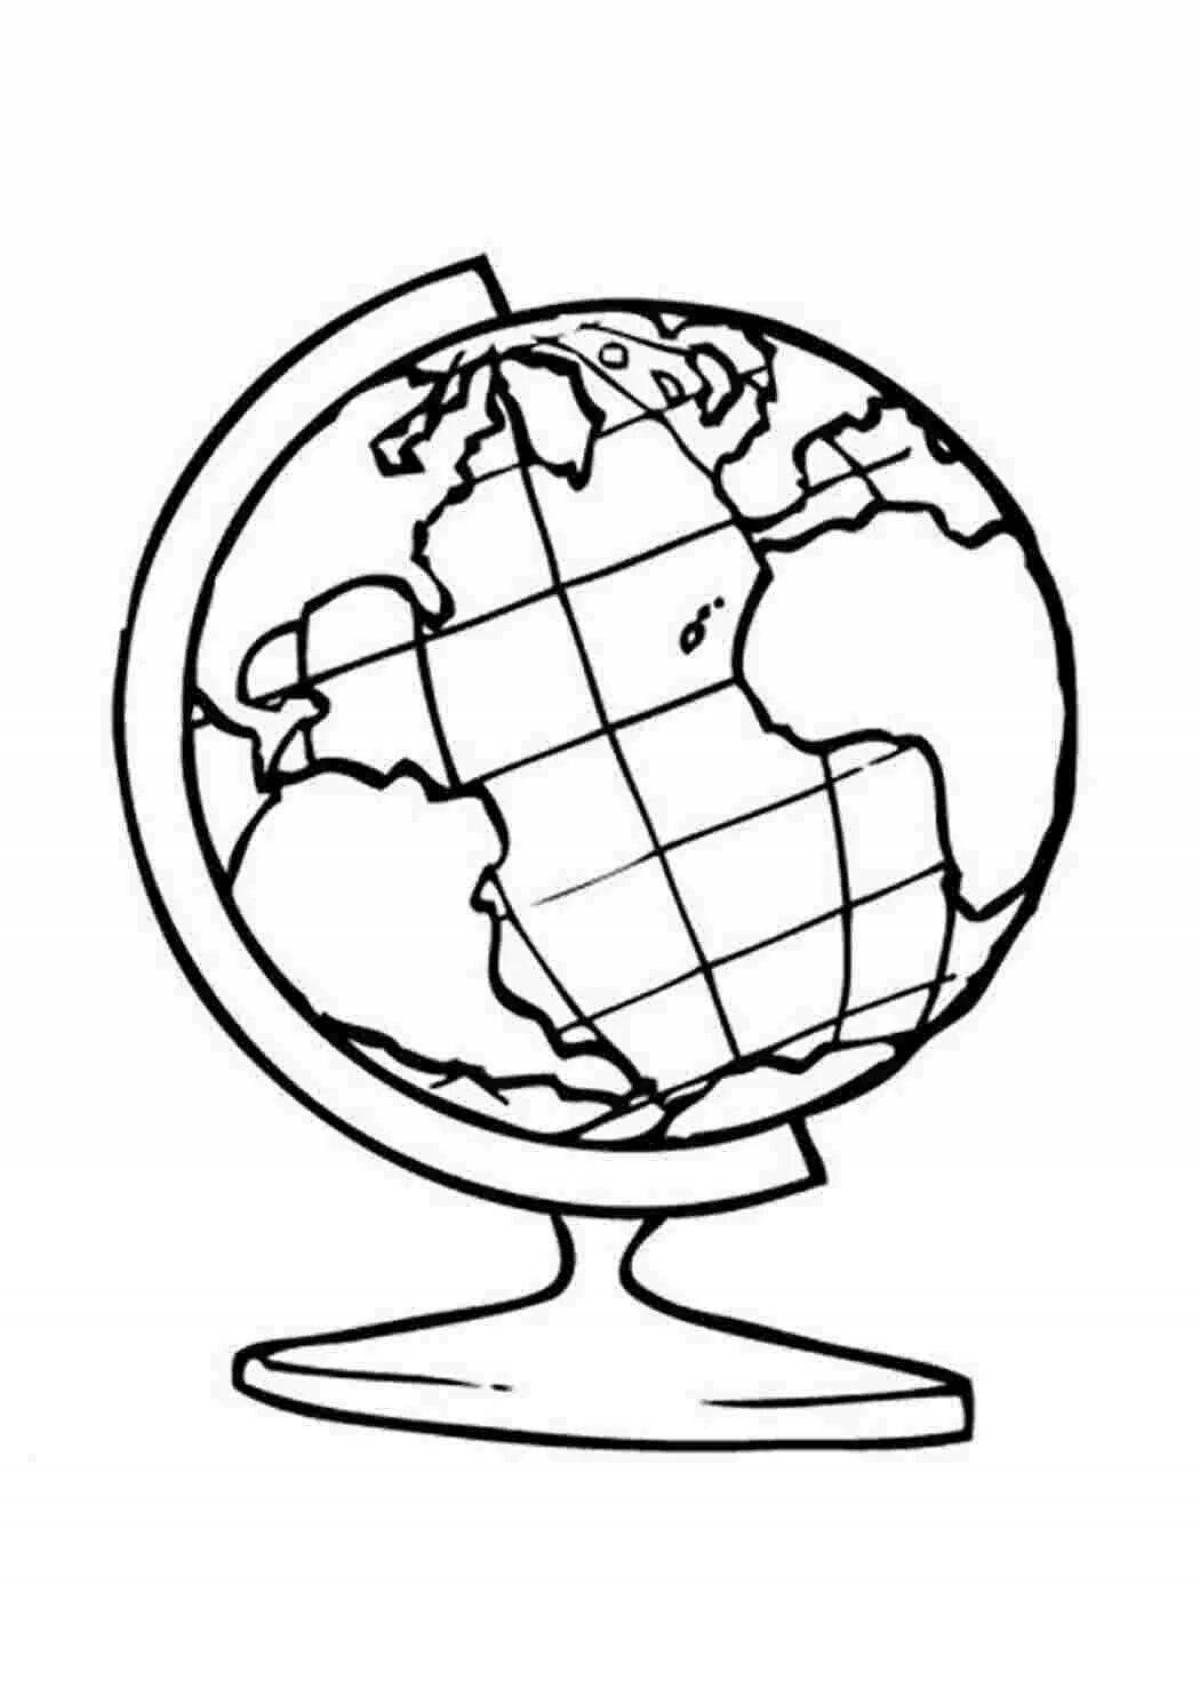 Complex geography coloring page